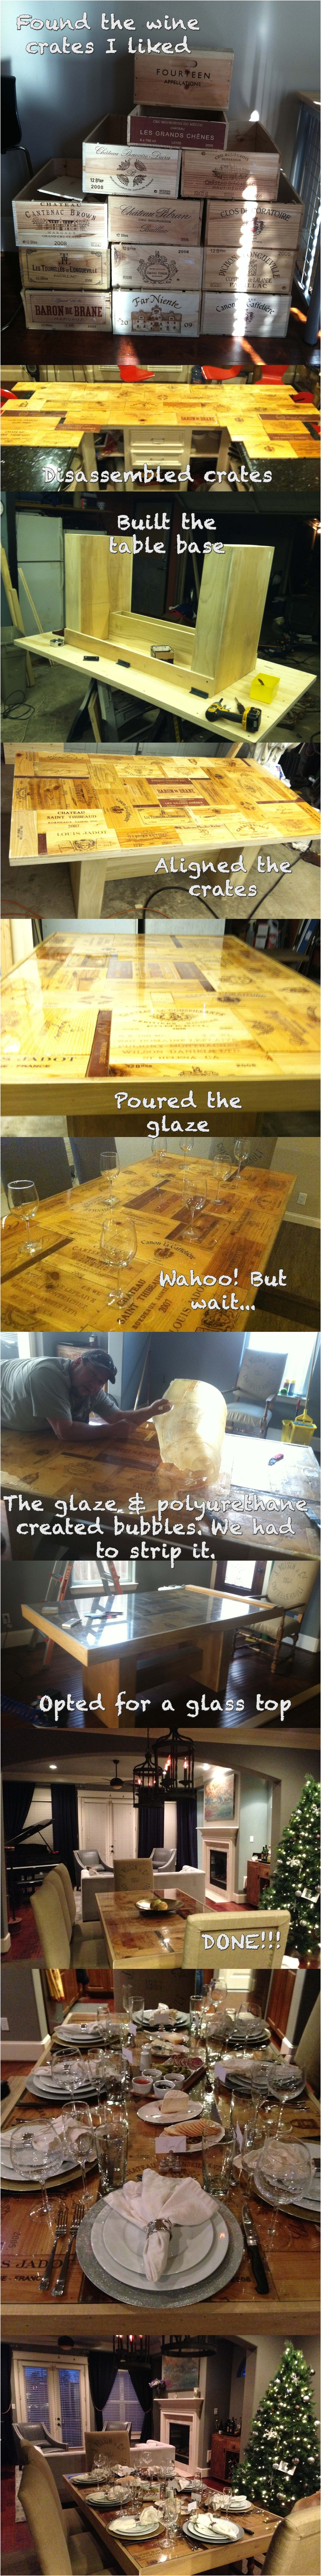 my wine crate table with the help of teddy lett let s fix it workshops